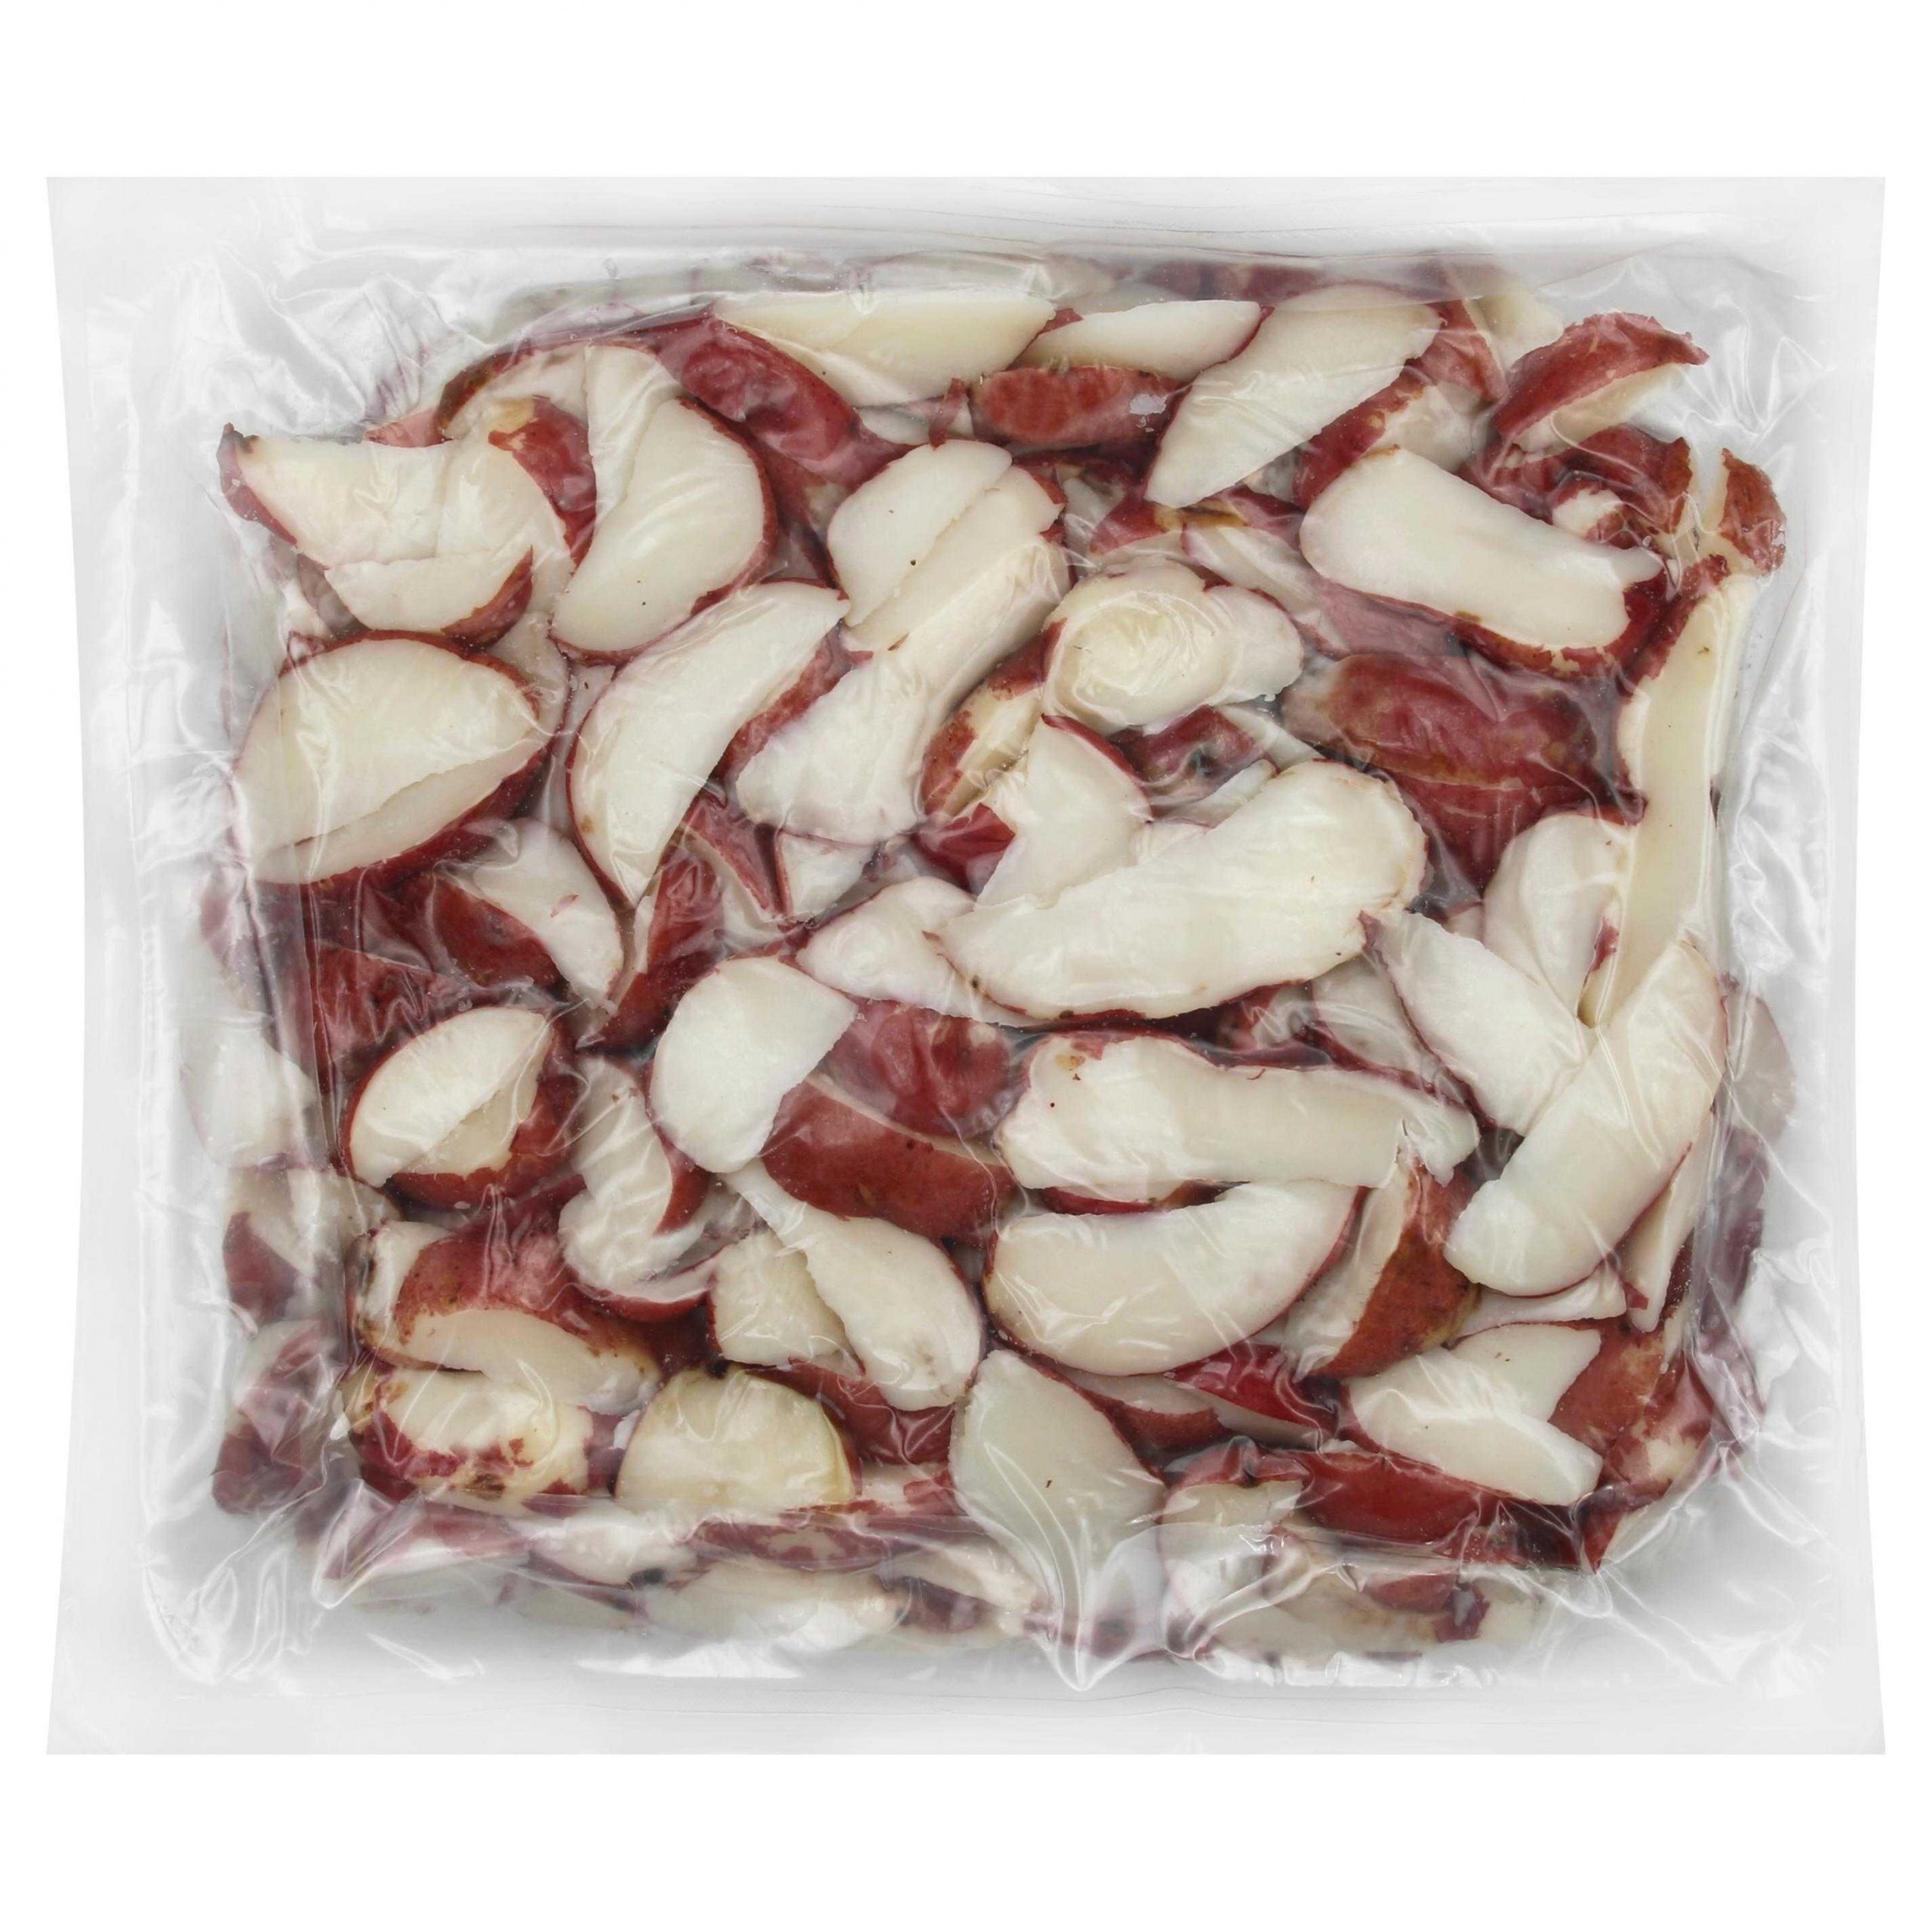 Simply Potatoes® Refrigerated Small Red Skin Wedges made with skin-on B-sized Red Potatoes 8-cut wedges, 2/10 Lb Bags